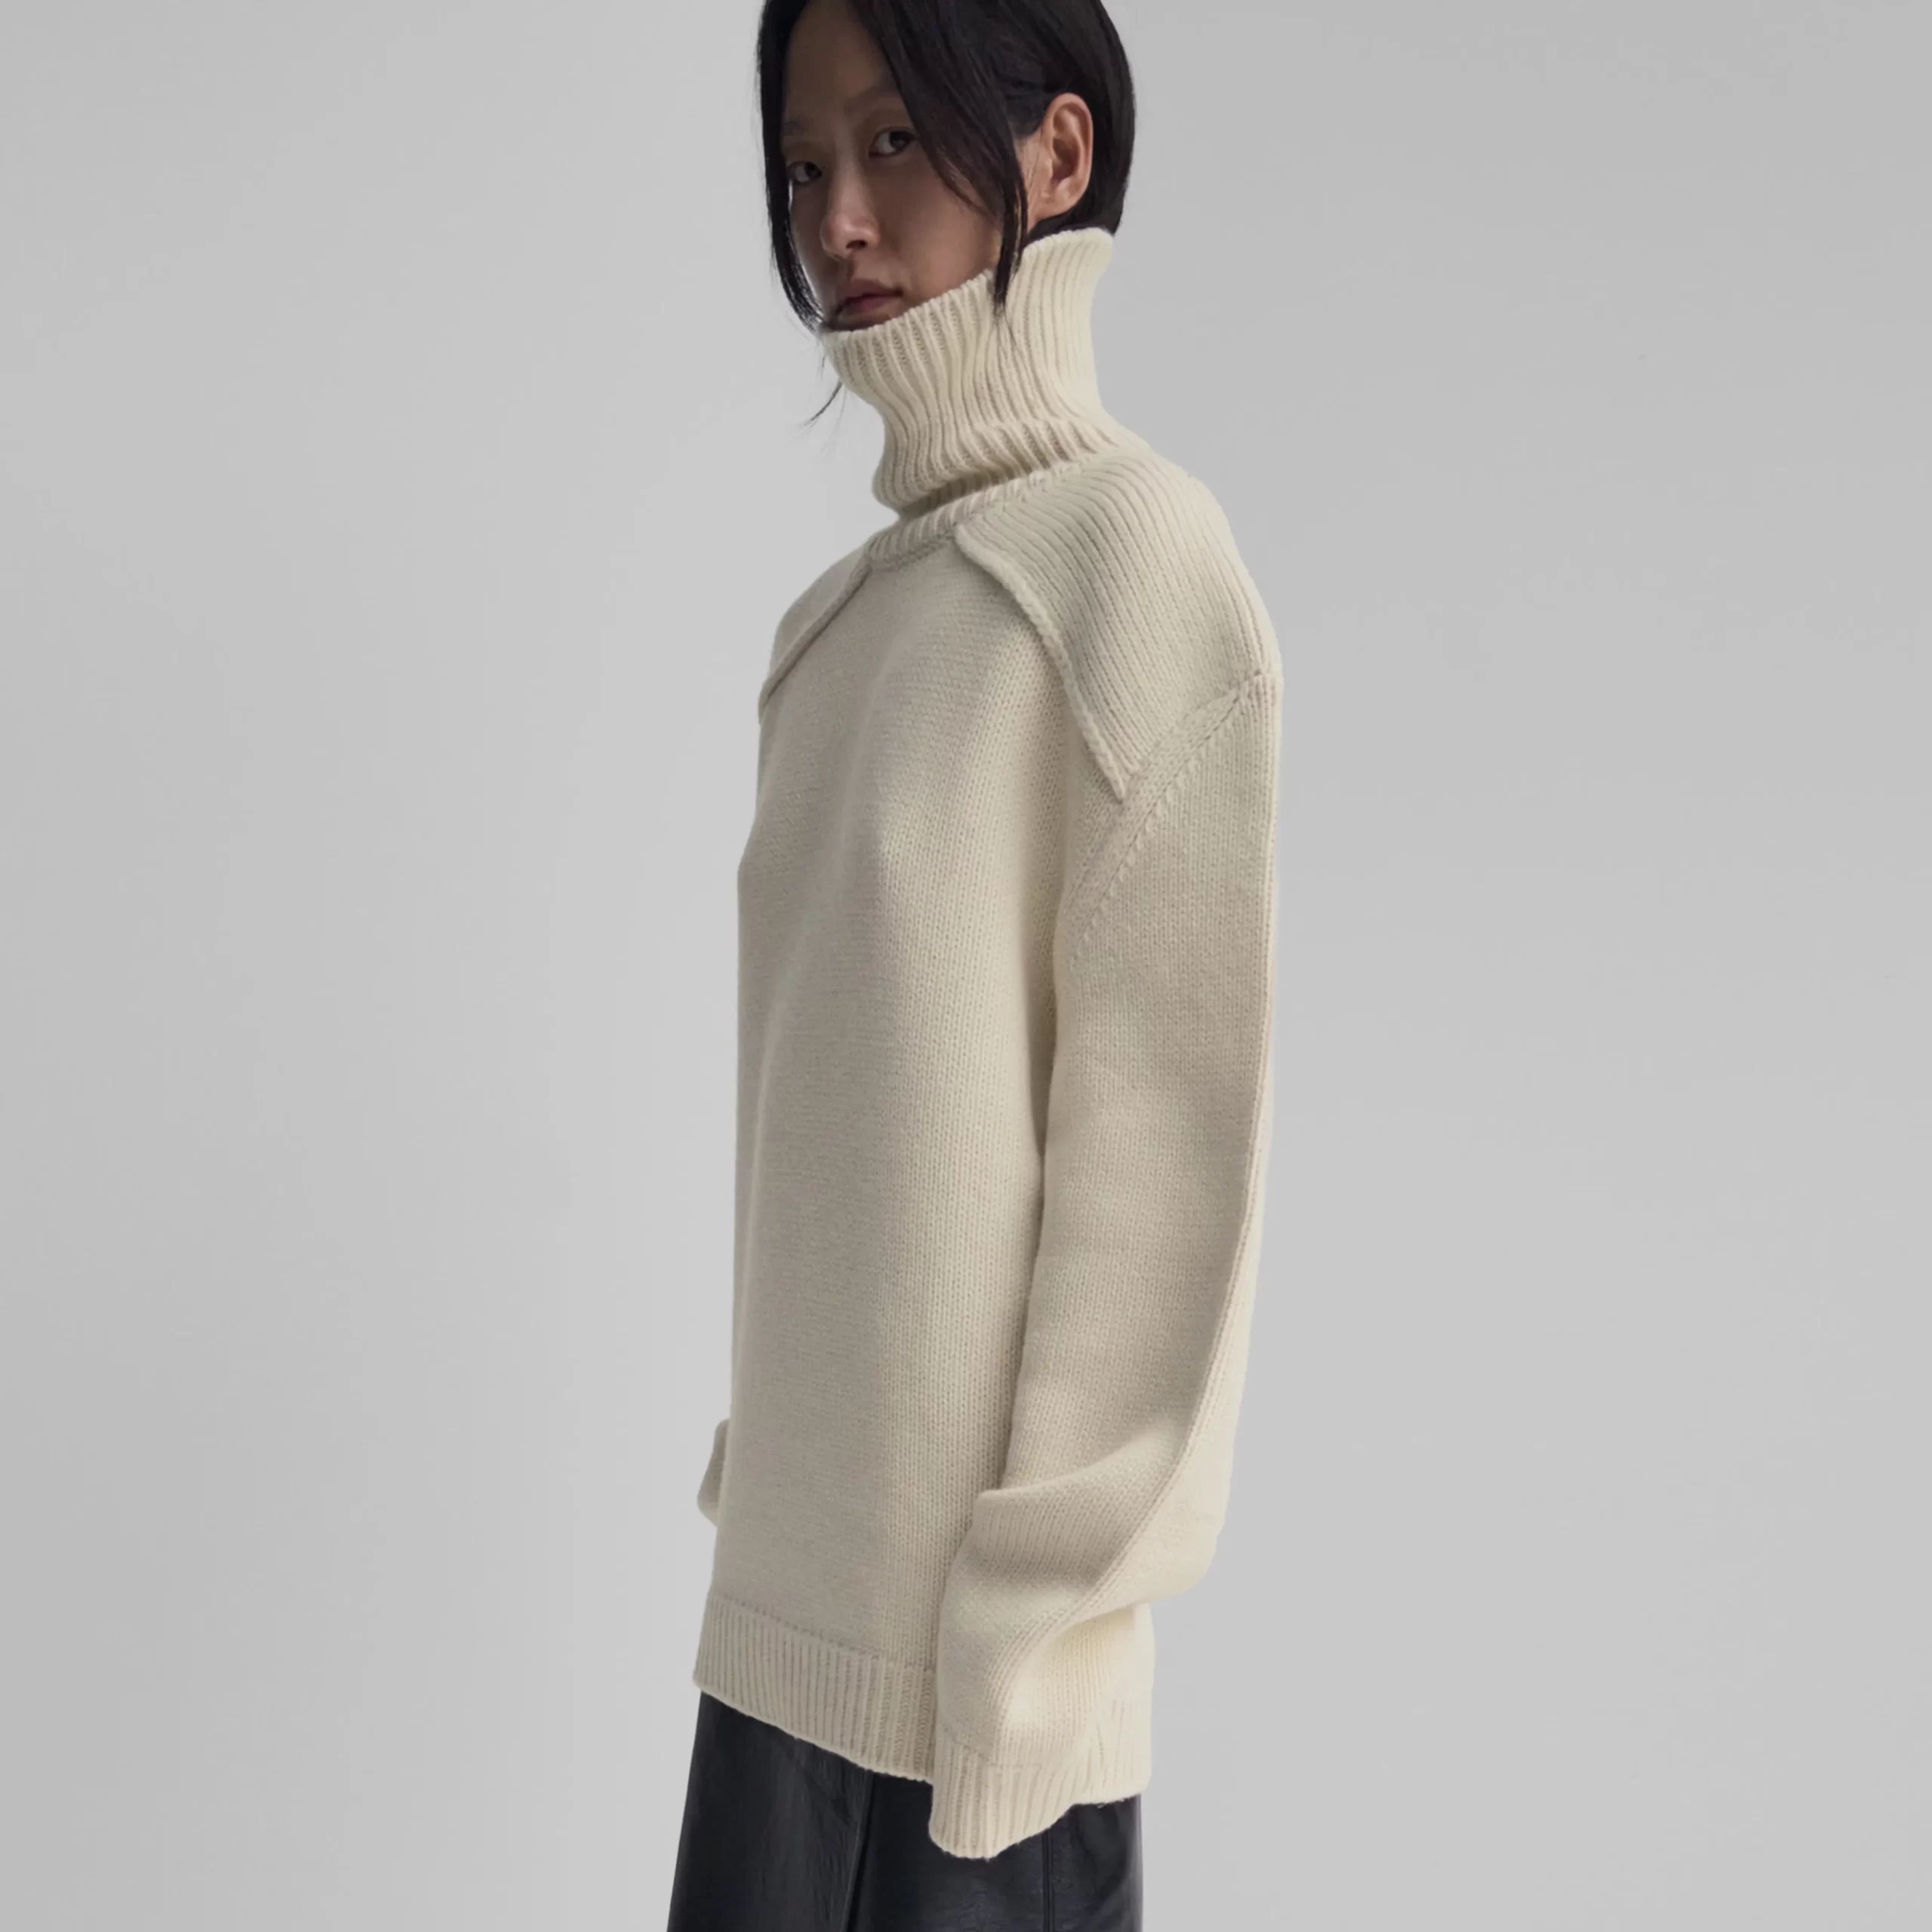 PHOEBE PHILO – MY FAVORITES FROM THE NEW COLLECTION